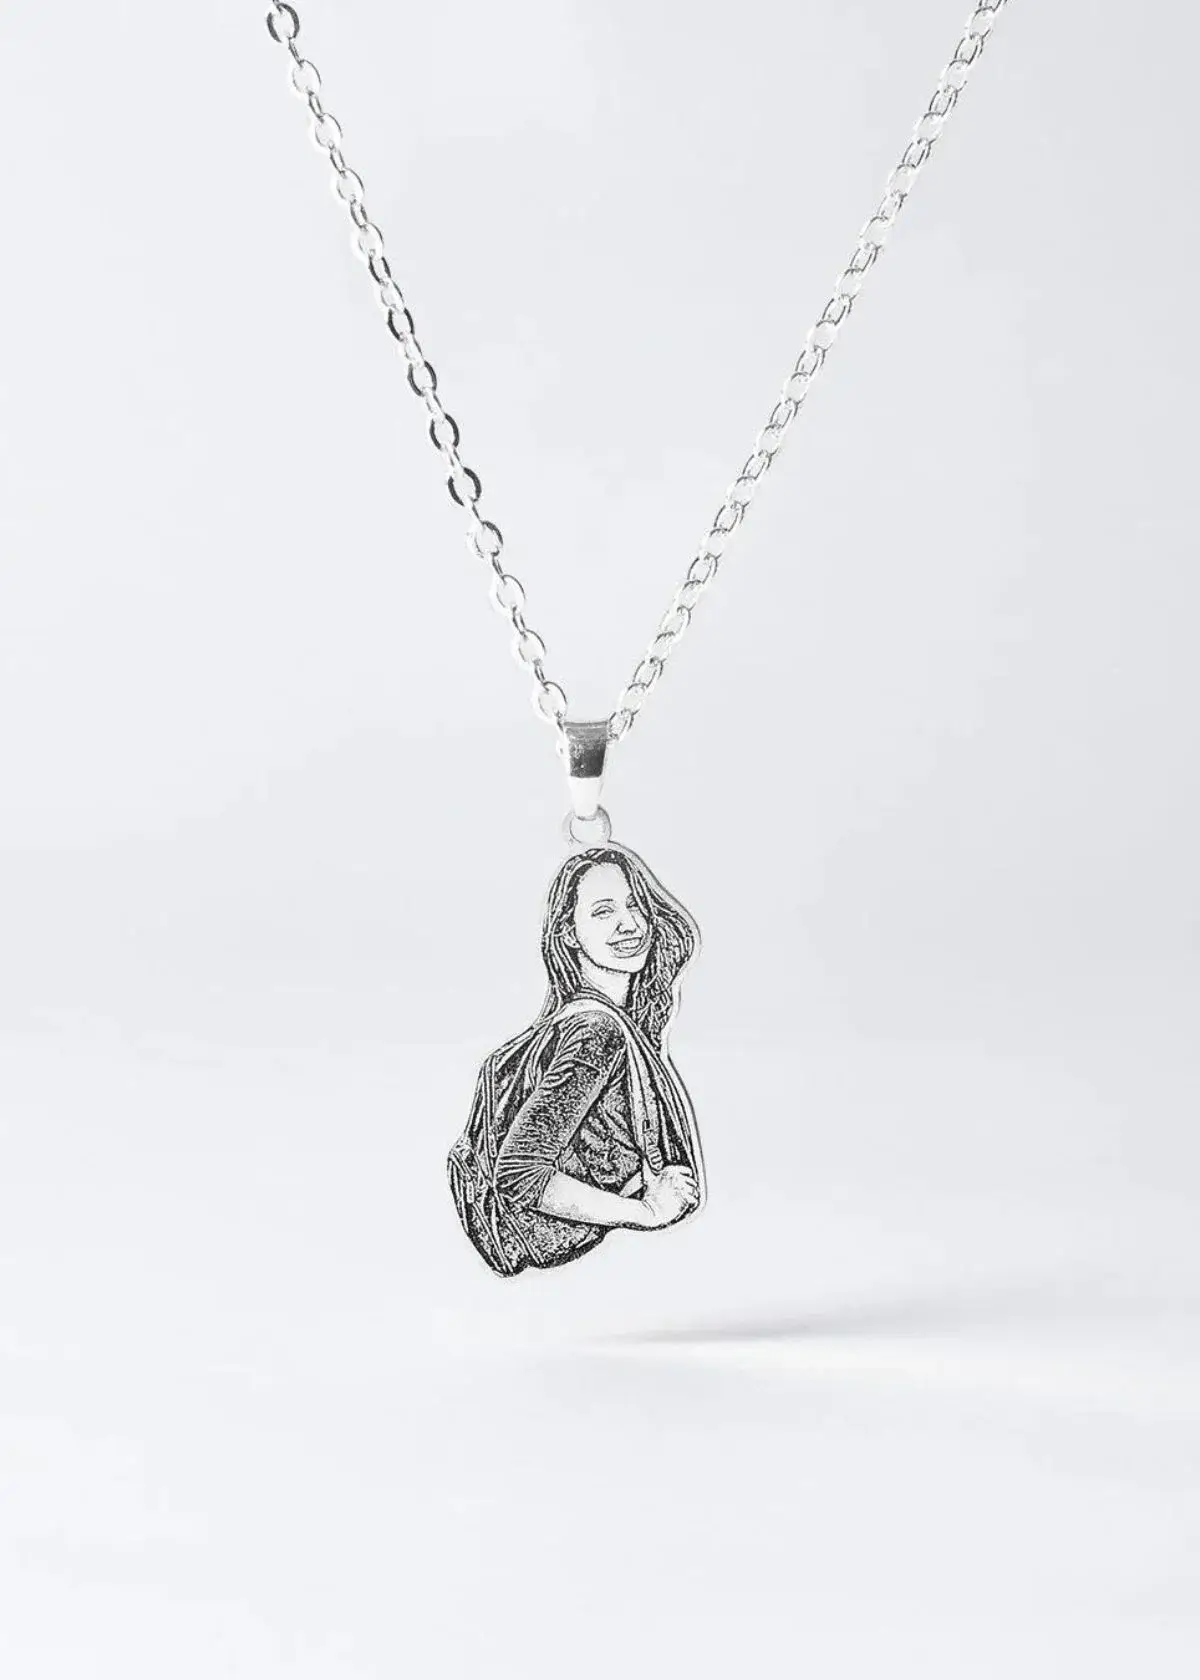 How to Choose the Right Portrait Necklace?